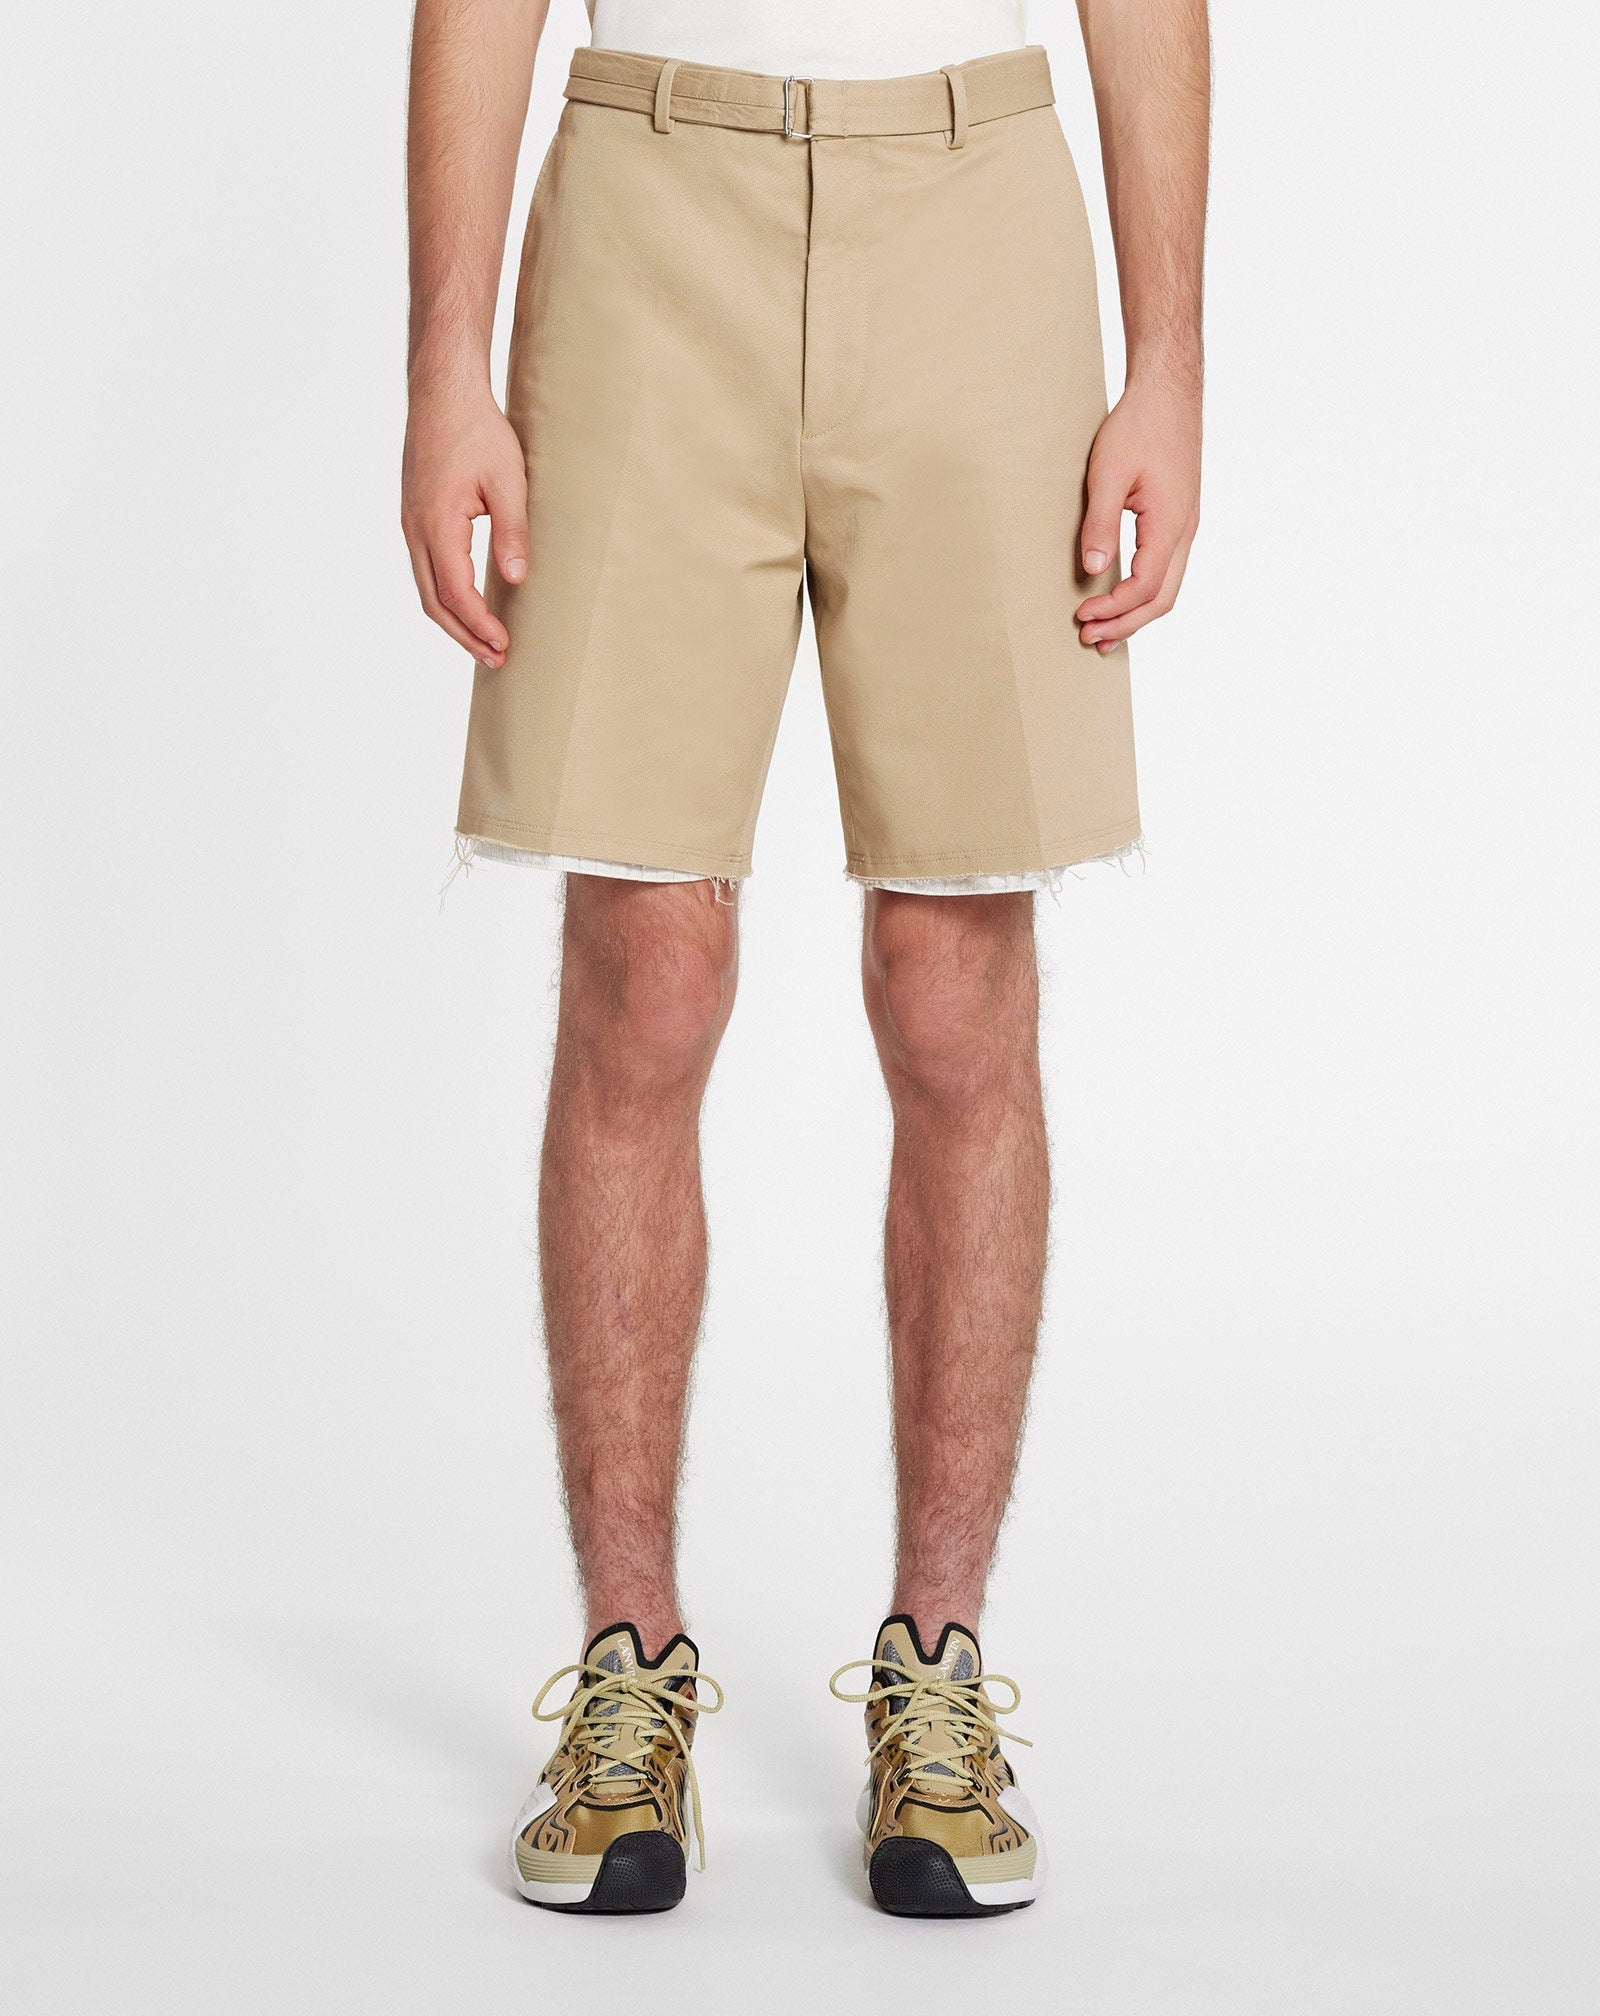 TAILORED SHORTS WITH RAW HEM DETAILS - 3